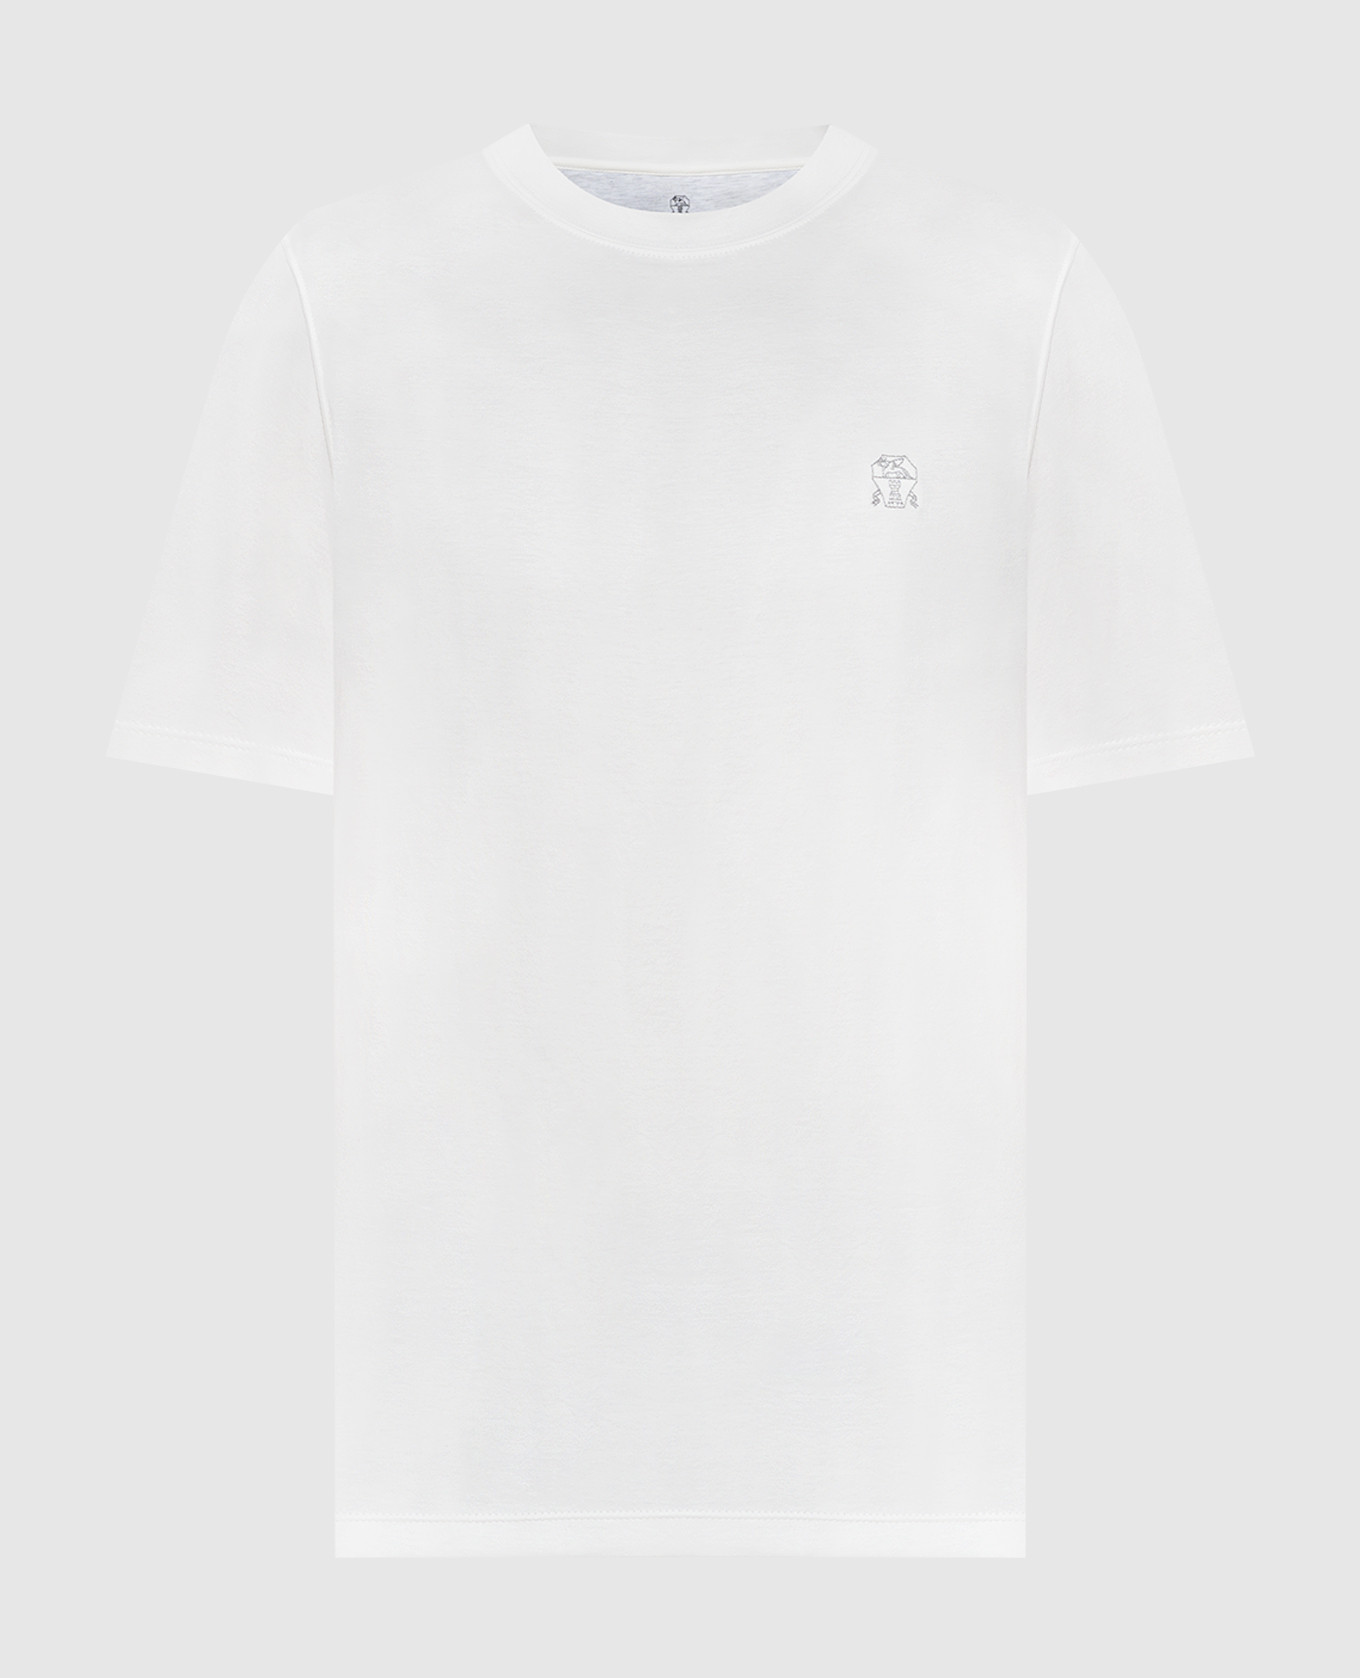 White t-shirt with embroidered logo emblem